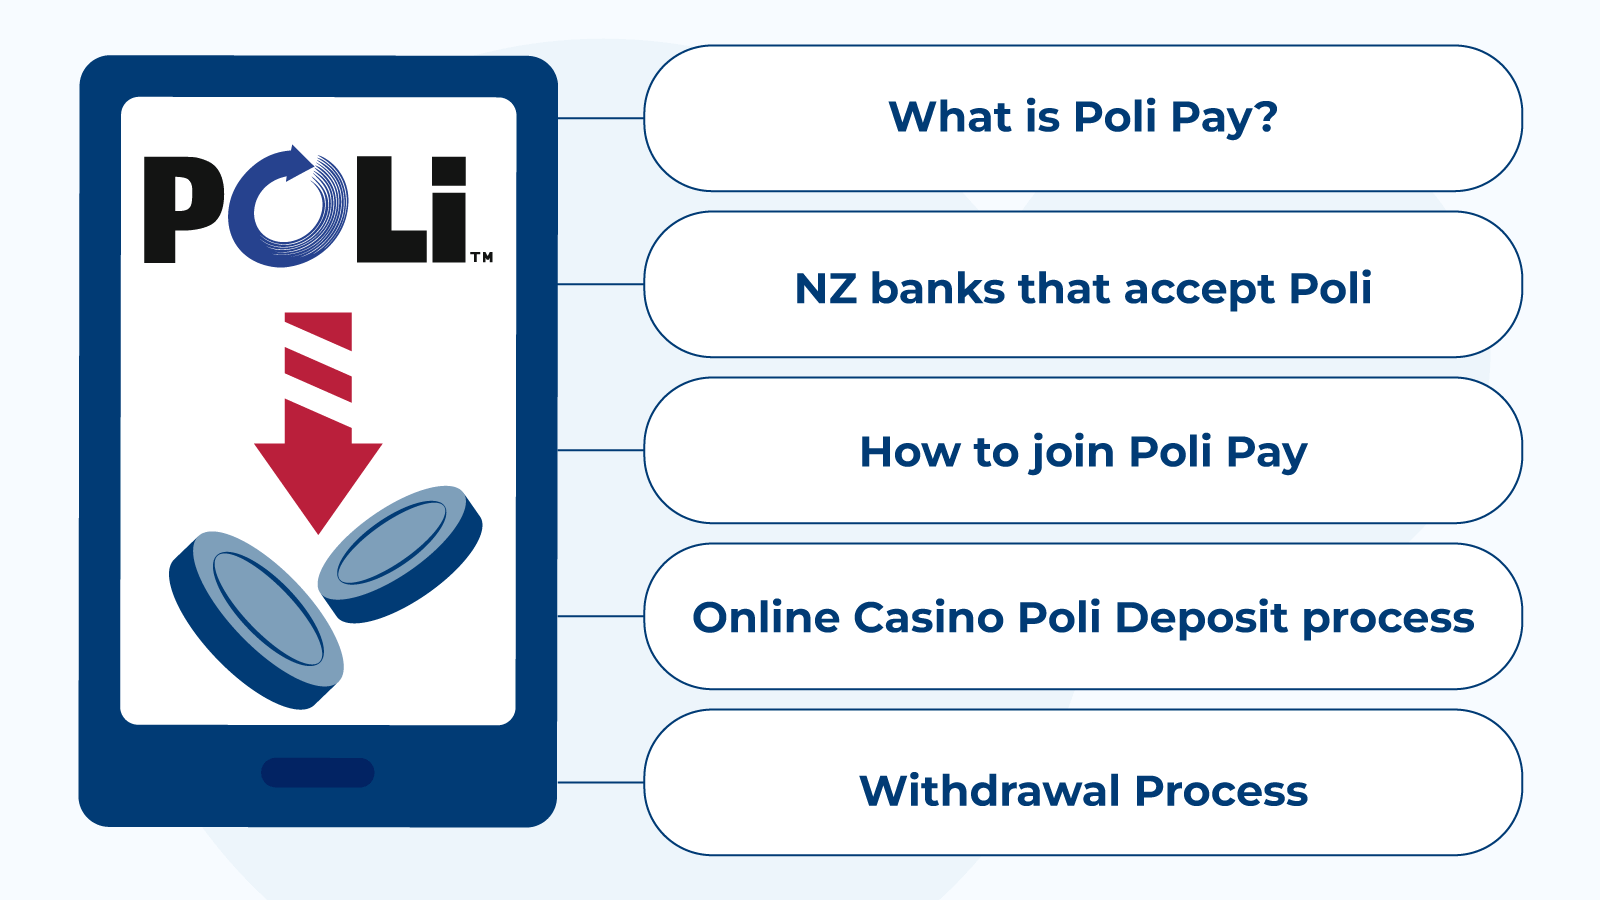 How to use Poli Pay for online gambling in New Zealand